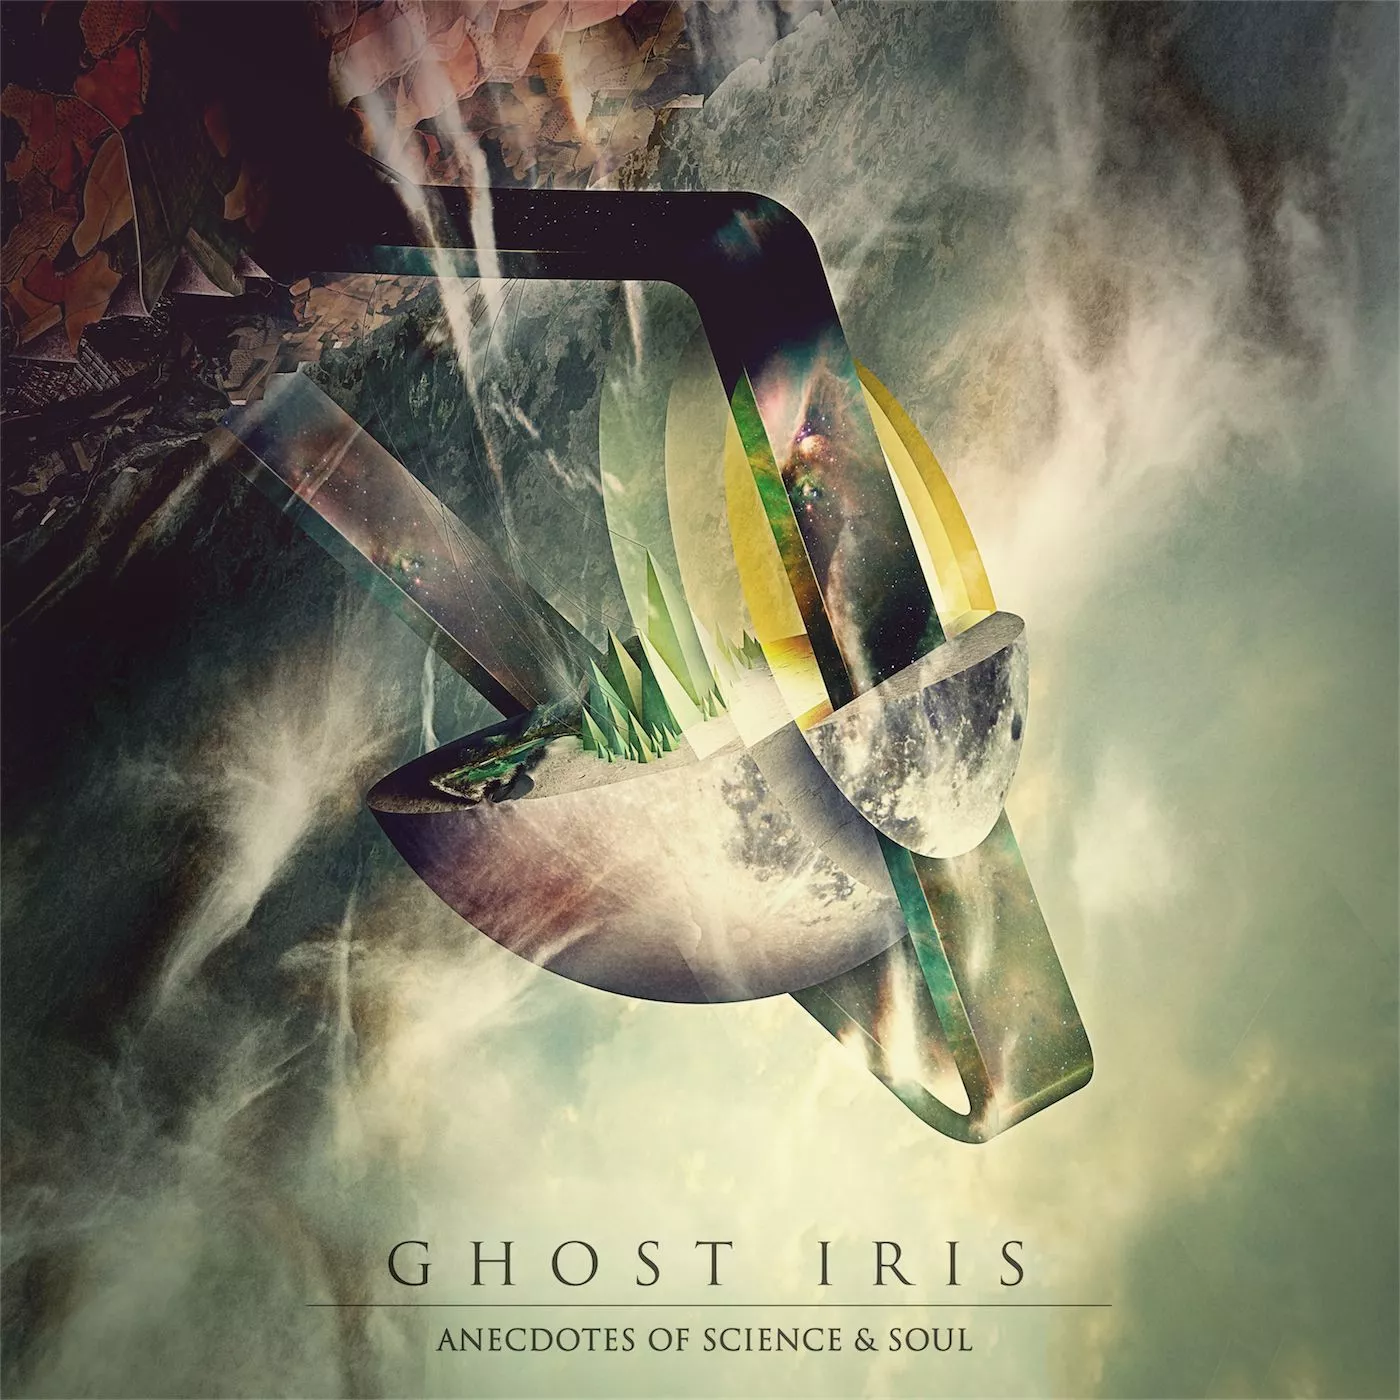 Anecdotes of Science & Soul - Ghost Iris